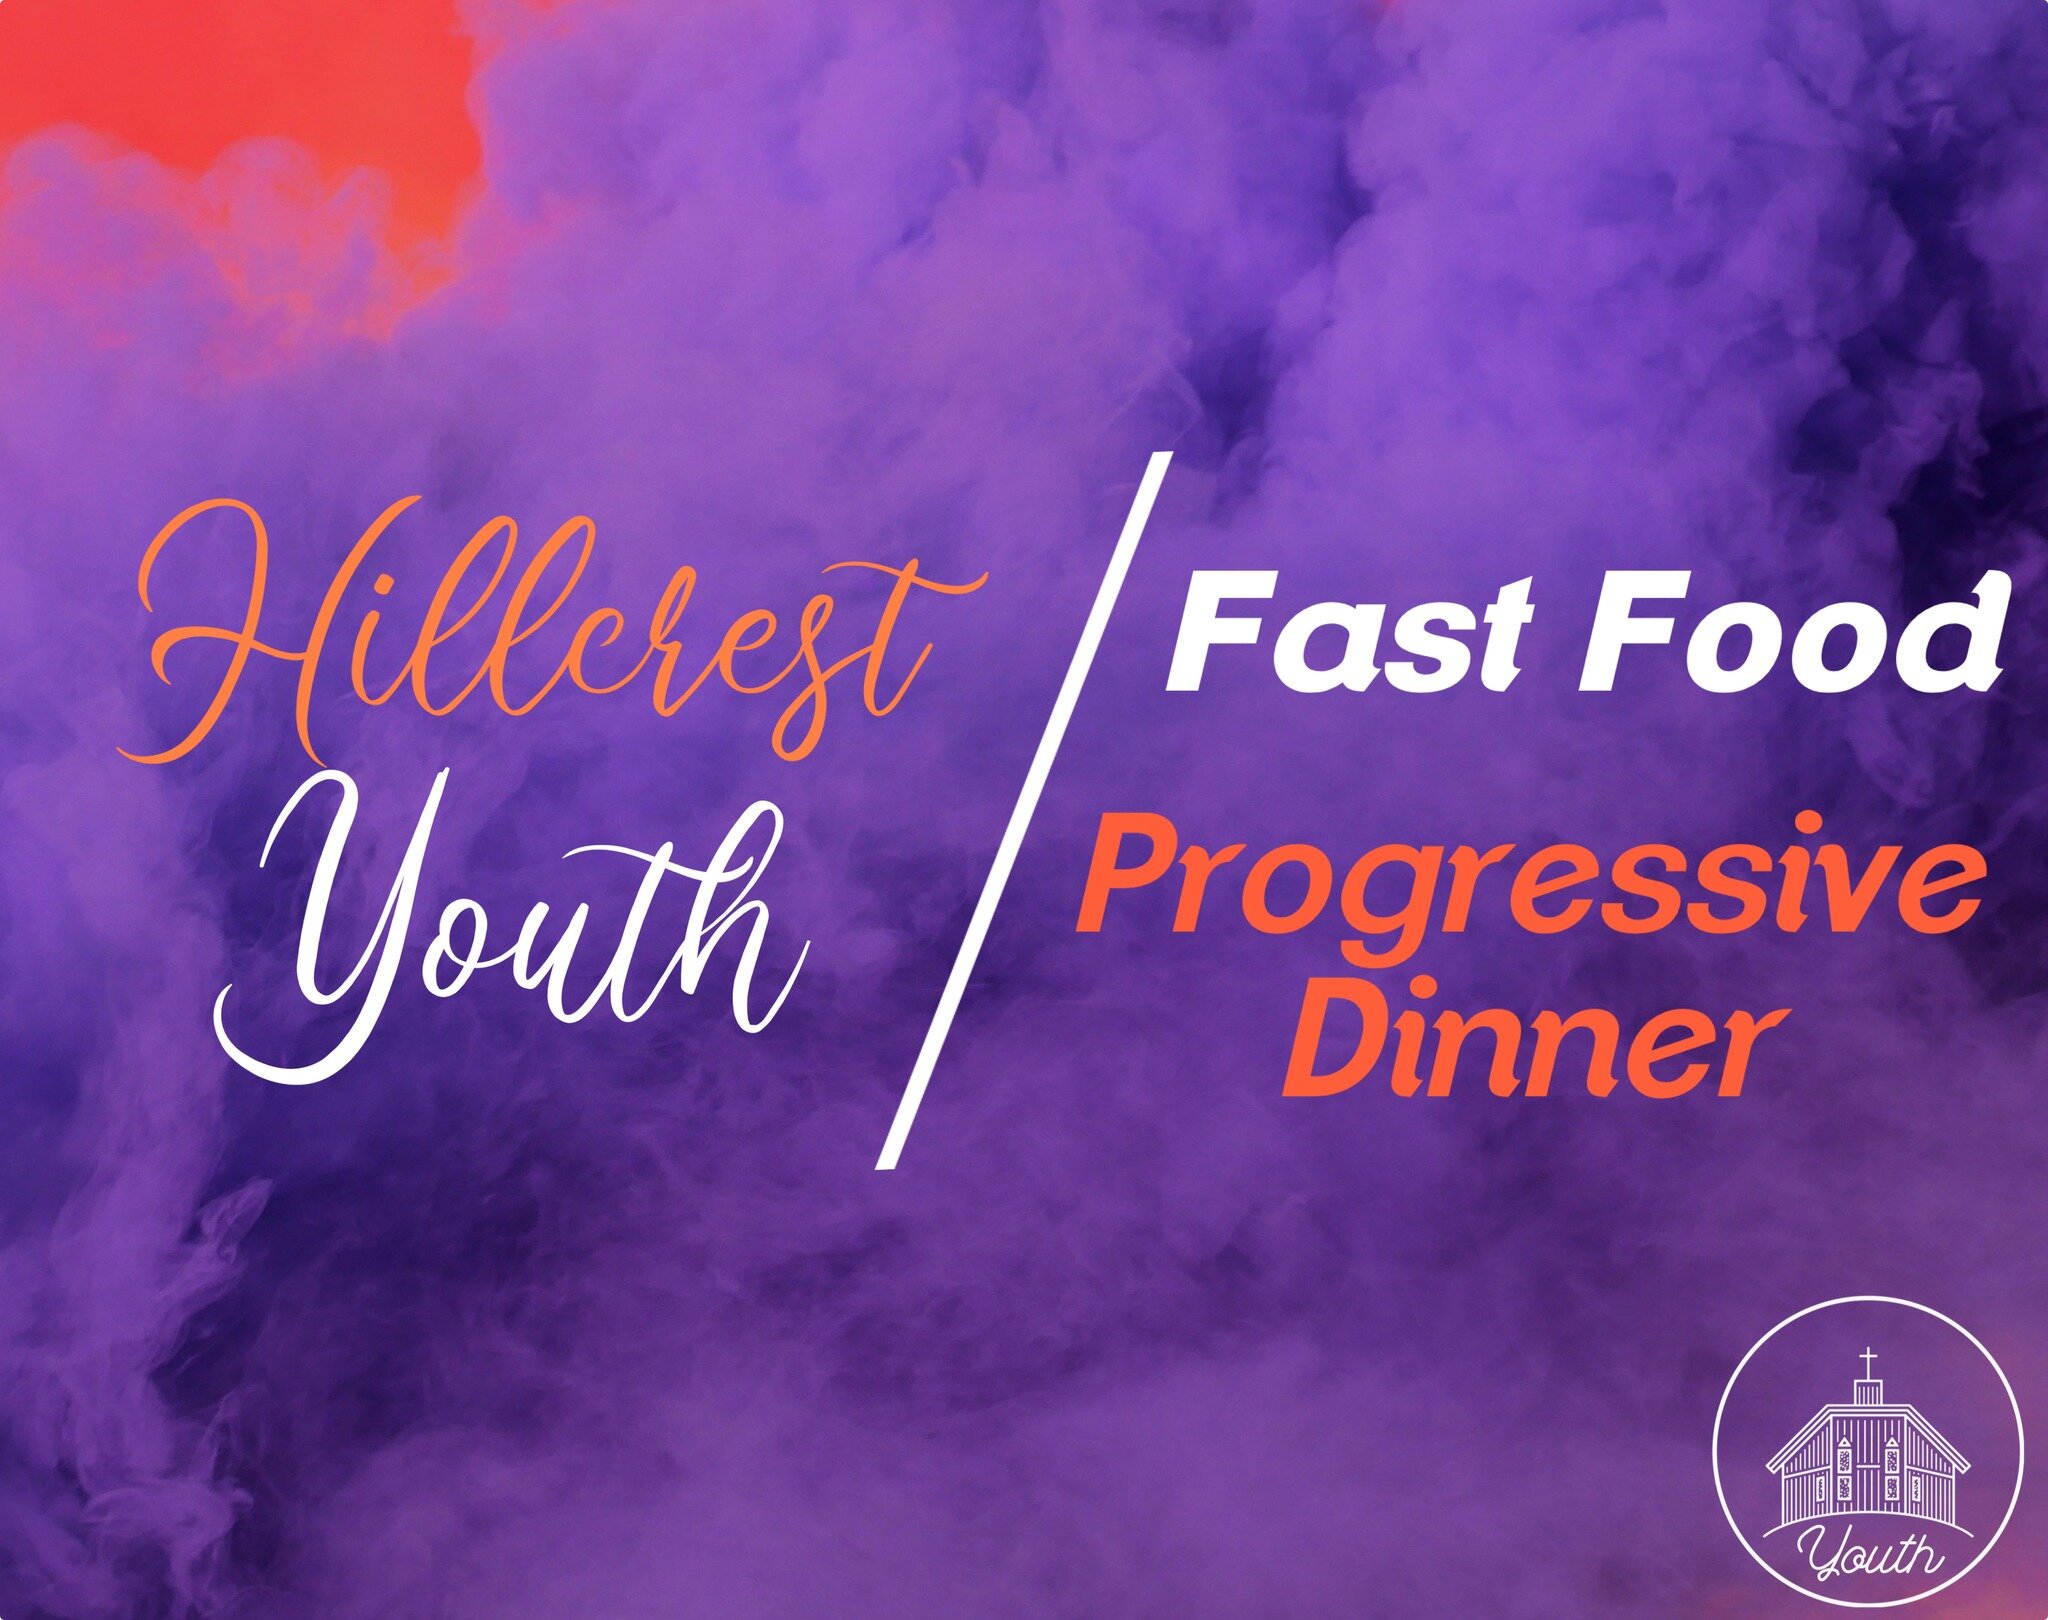 Spots are going fast for our Jr High Fast Food Dinner this Friday from 6pm-9pm. Register online at Hillcrestnaz.church/youth to save your spot! #hillcrestyouth